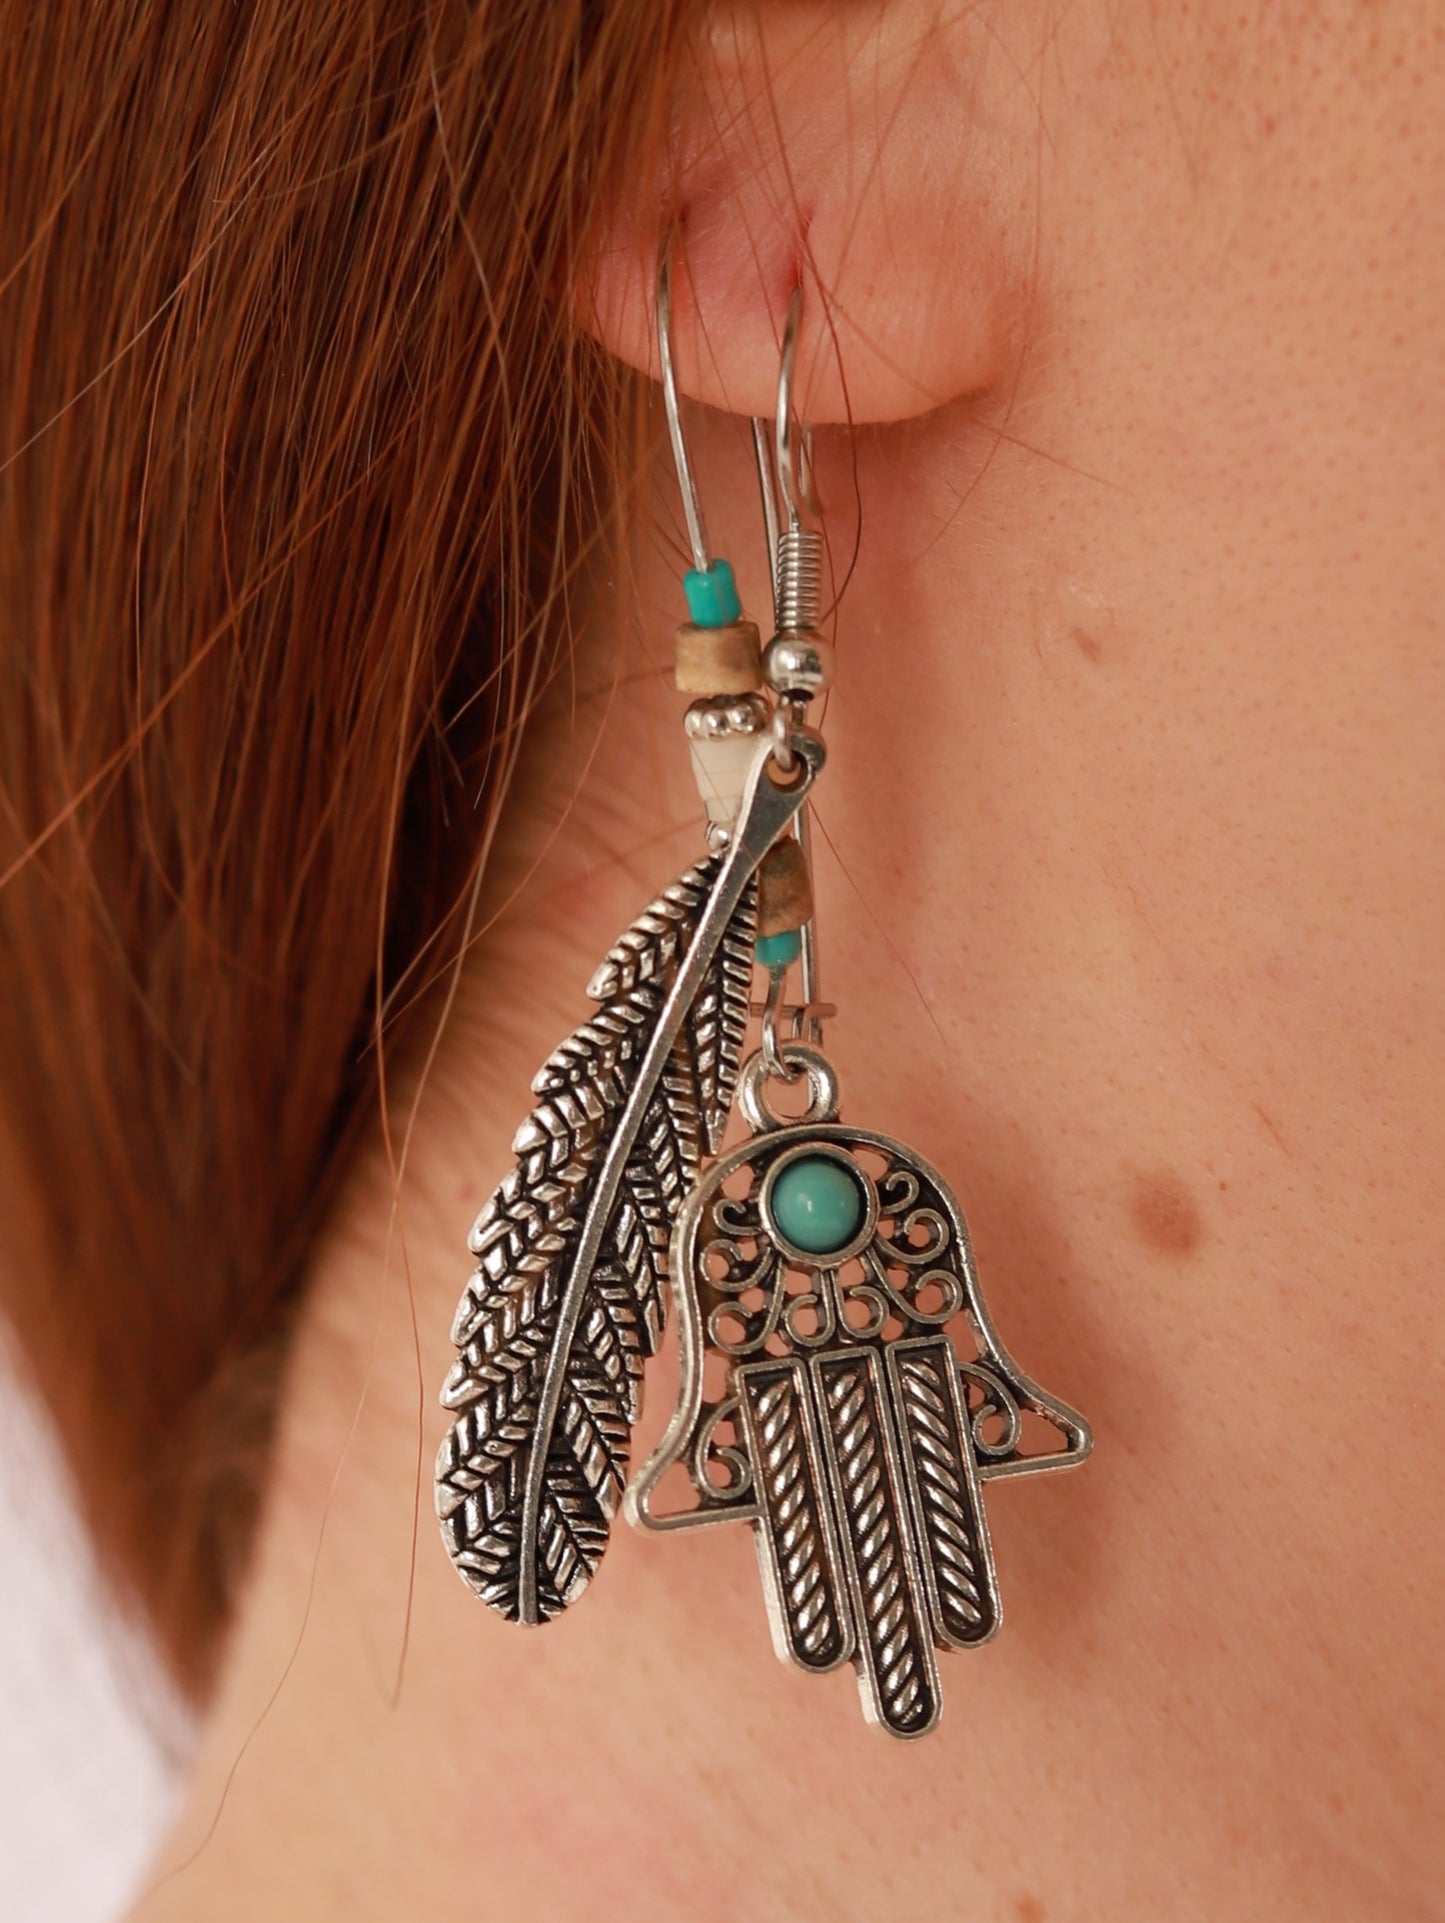 Vintage Style Silver Plated Feather Earrings